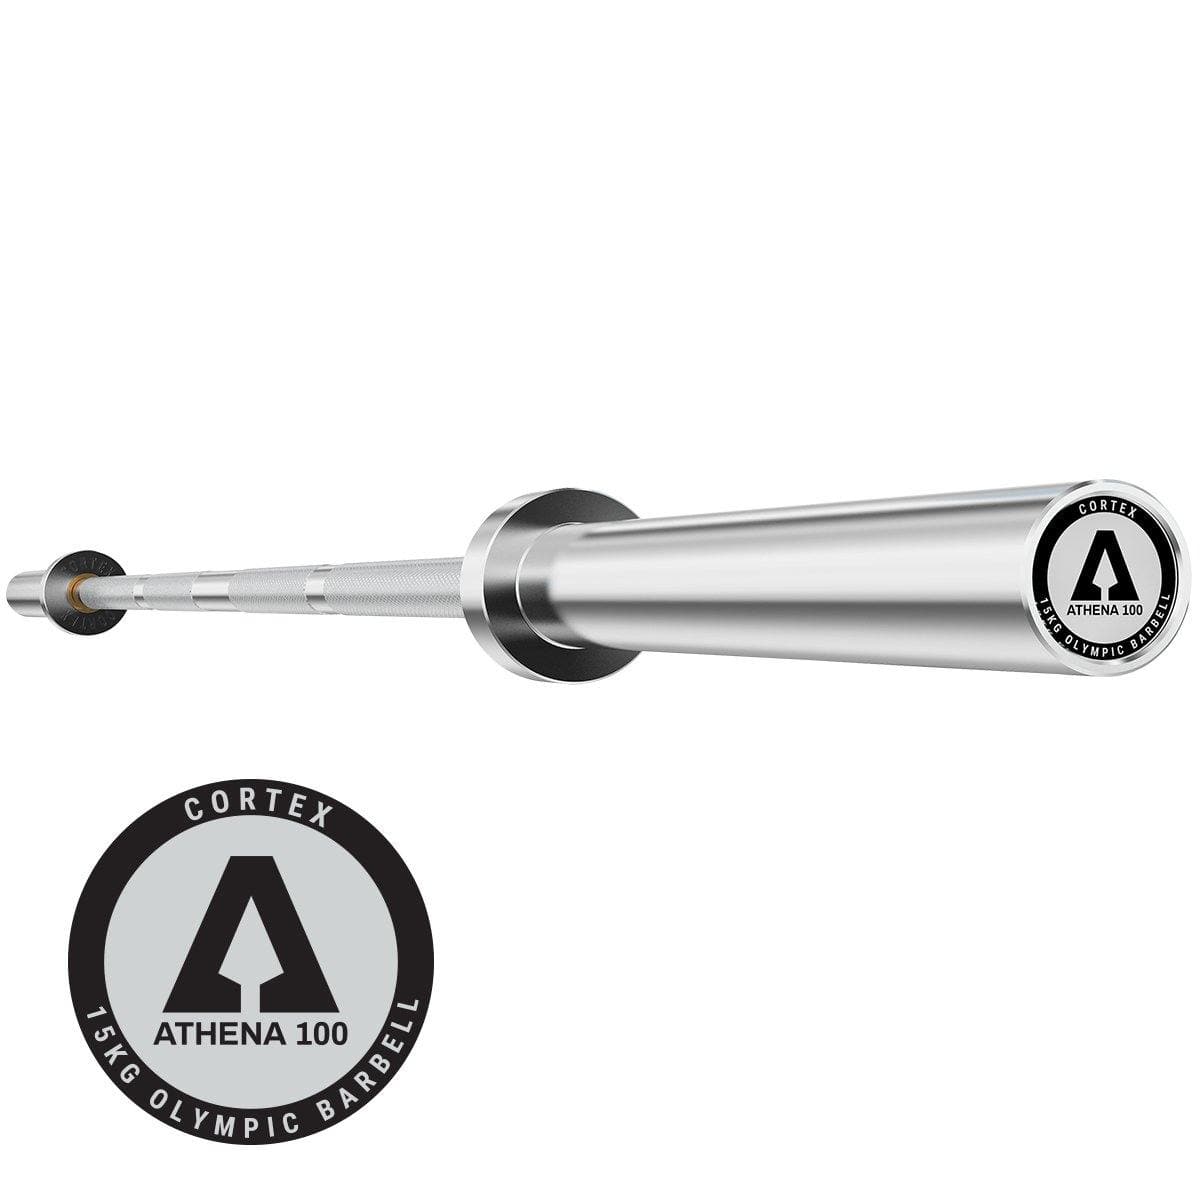 15kg Olympic Barbell ATHENA100 200cm + Spring Collars Musclemania Fitness MegaStore